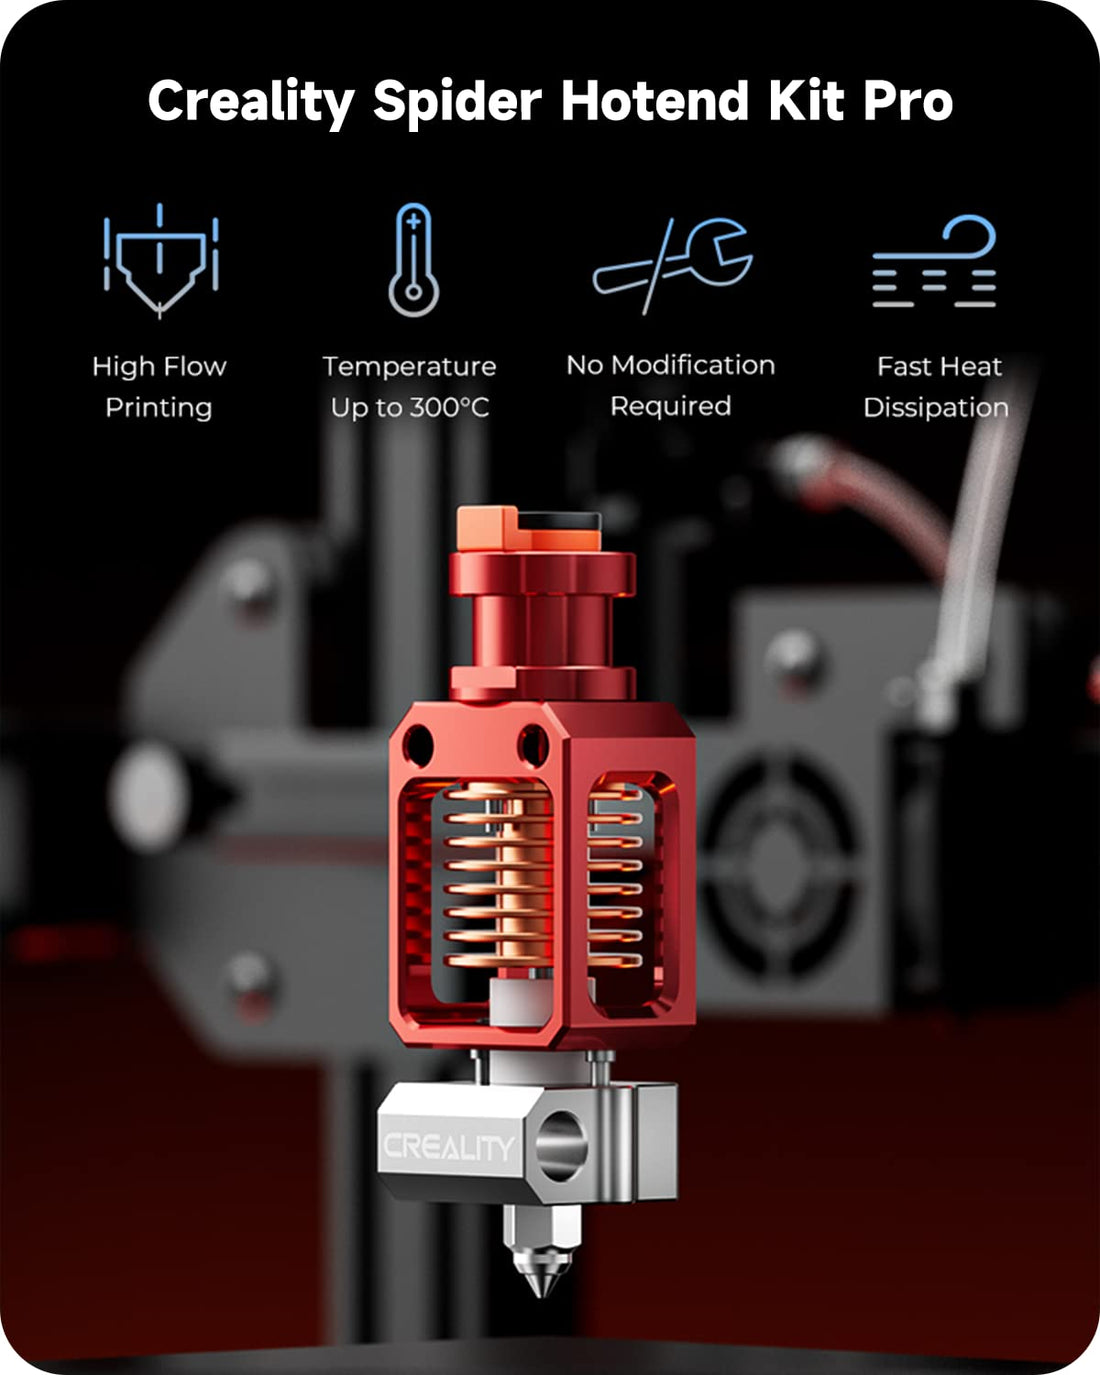 Creality Official Spider Hotend 3.0 Pro, Supporting 300℃ High Temperature Printing, Compatible with Creality Ender 3, Ender 3v2, Ender 3 pro, Ender 5 Series and CR-10 Series 3D Printer